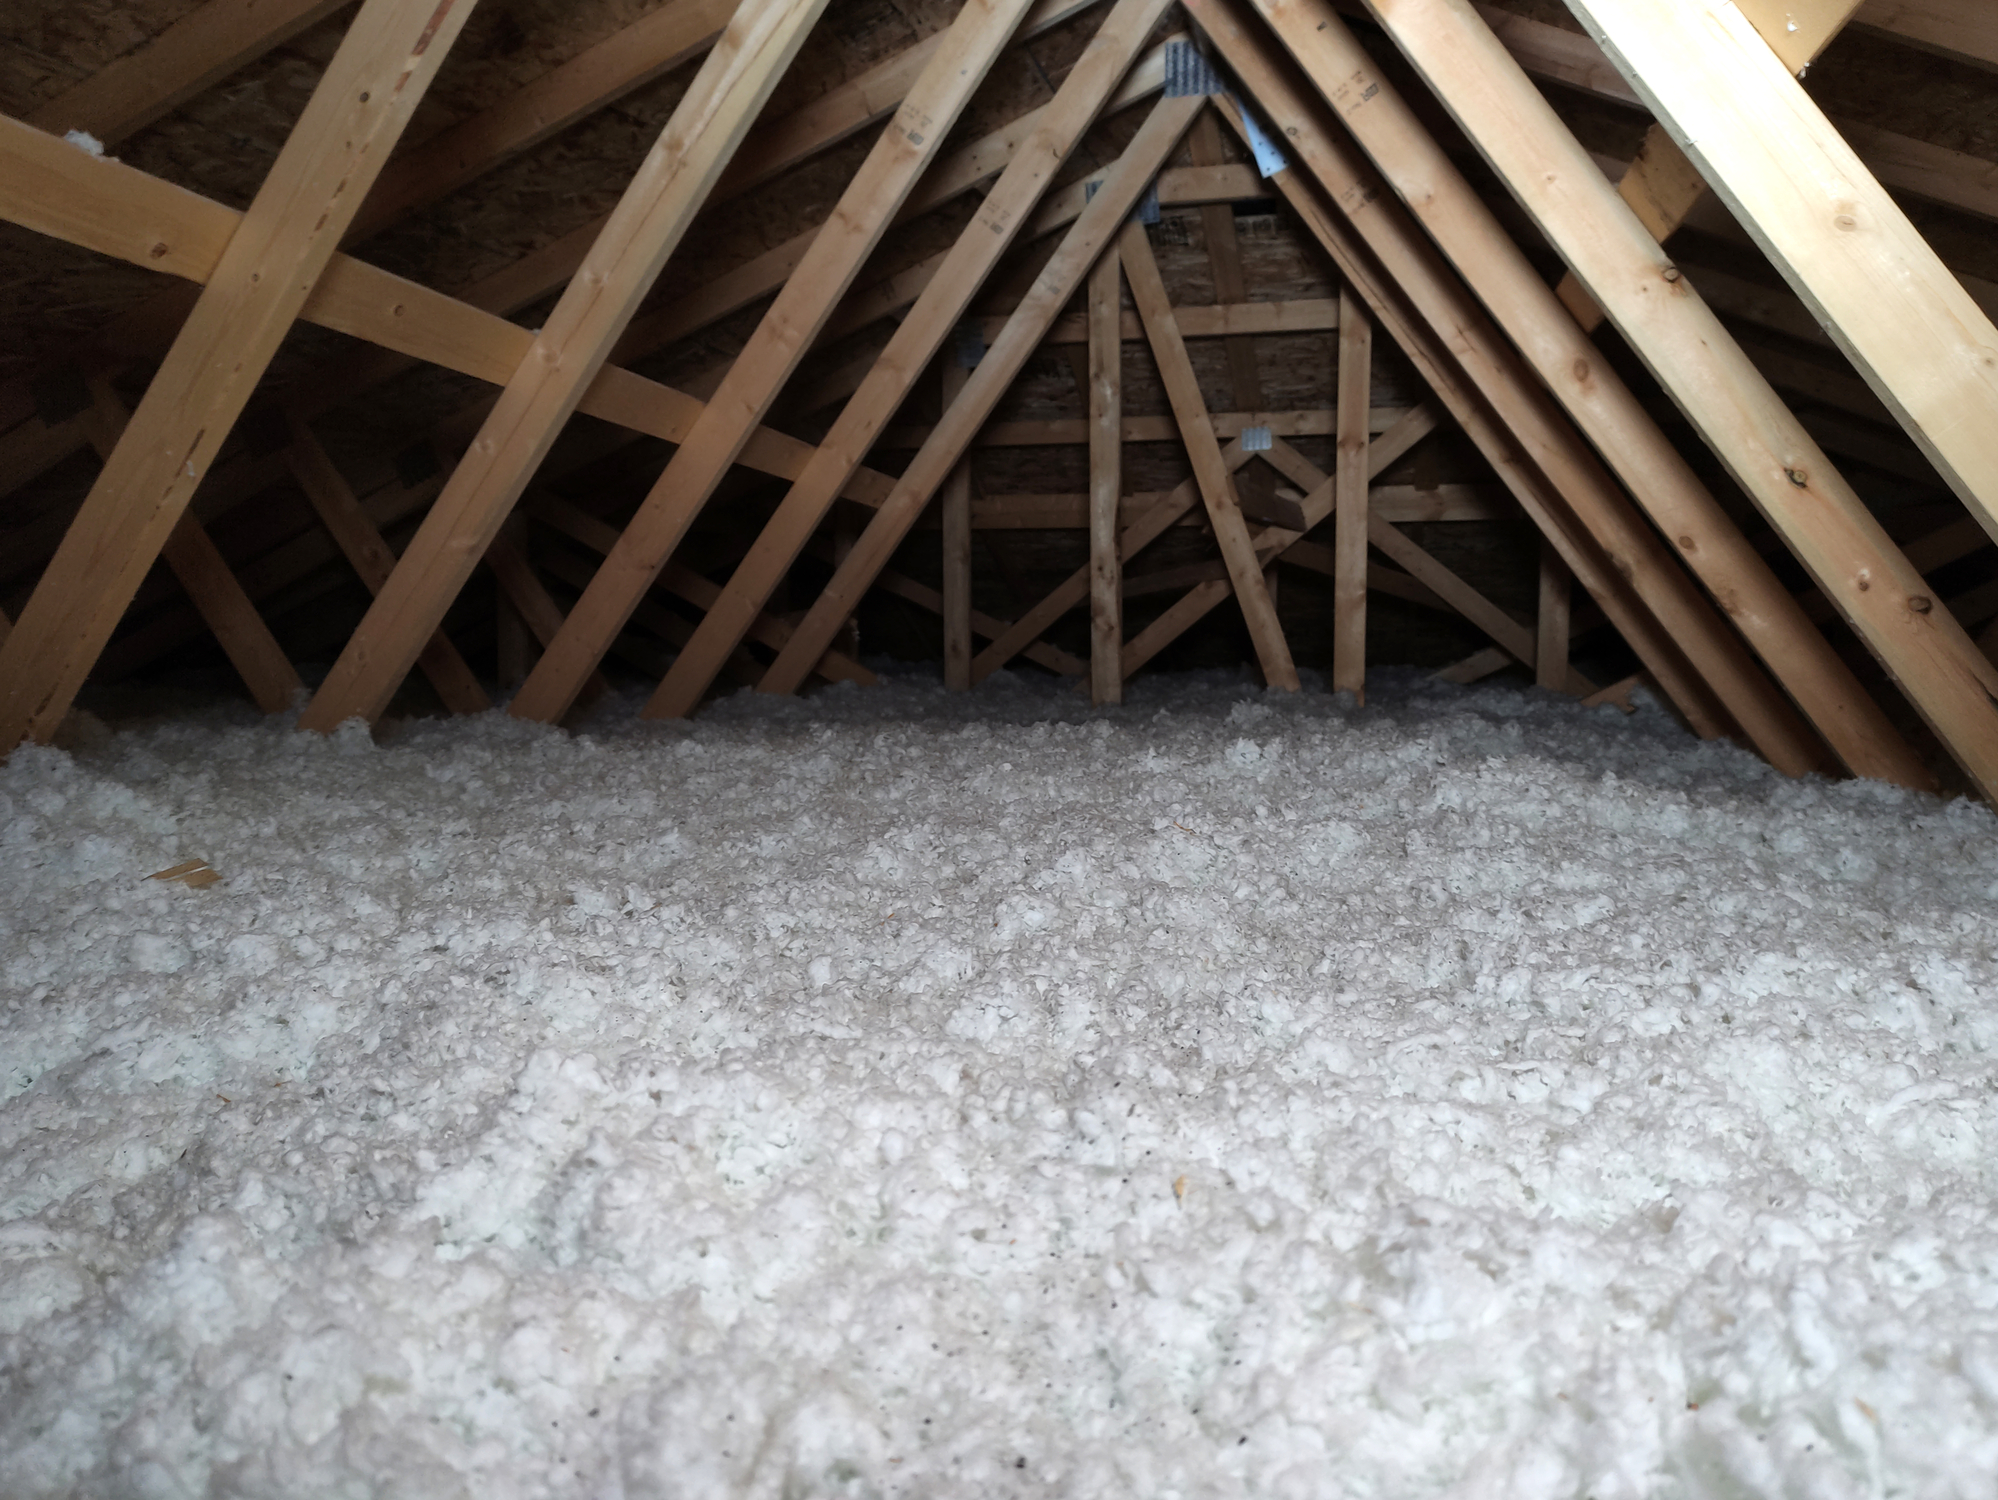 Does Insulating Attic Keep Homes Cooler?